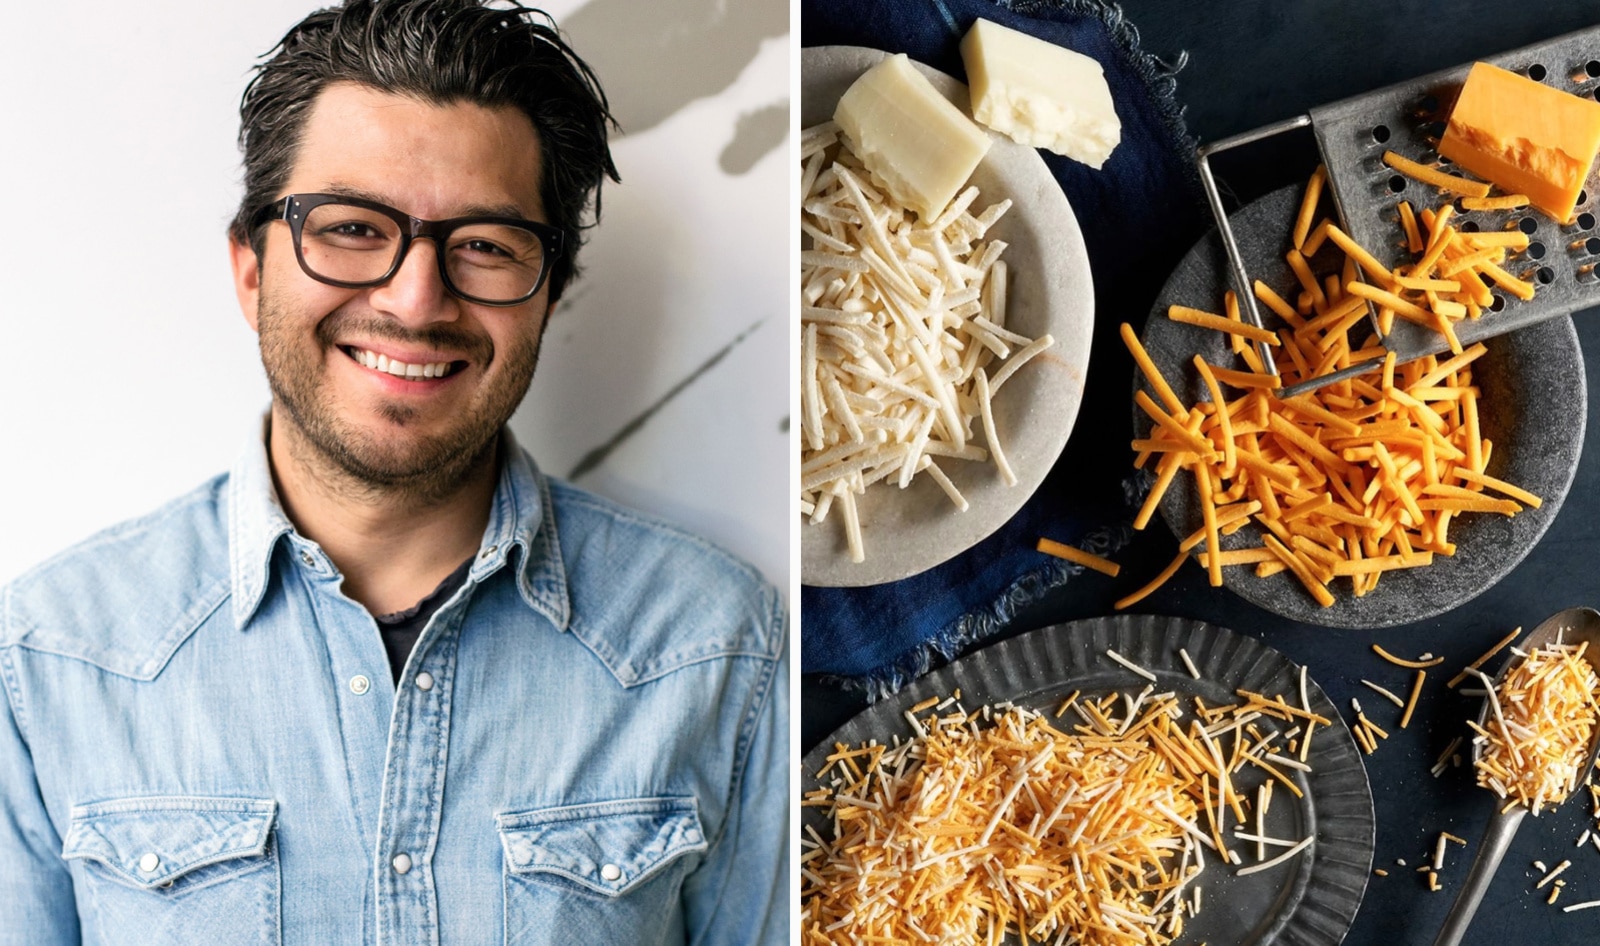 Michelin-Starred Chef Josef Centeno Is Replacing Dairy with Vegan Cheese in His Most Popular Dishes and Says You Should, Too.